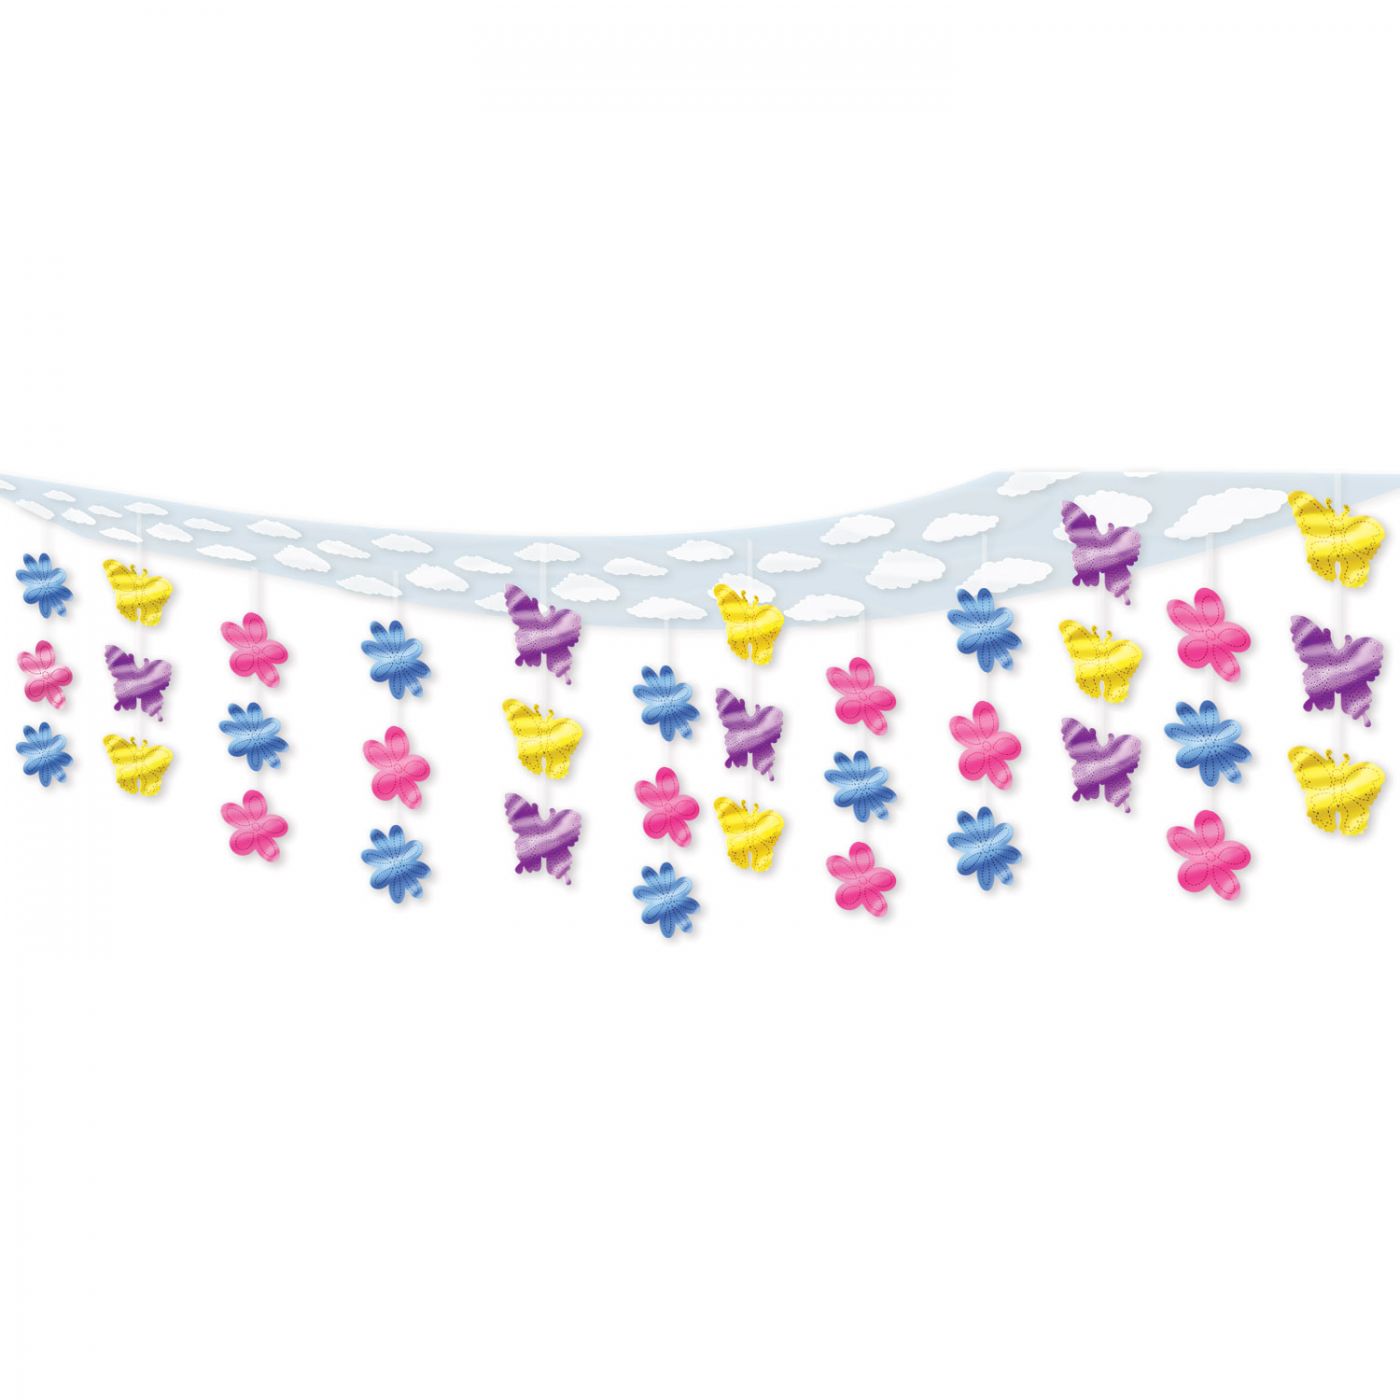 Butterfly & Flower Ceiling Decor (6) image